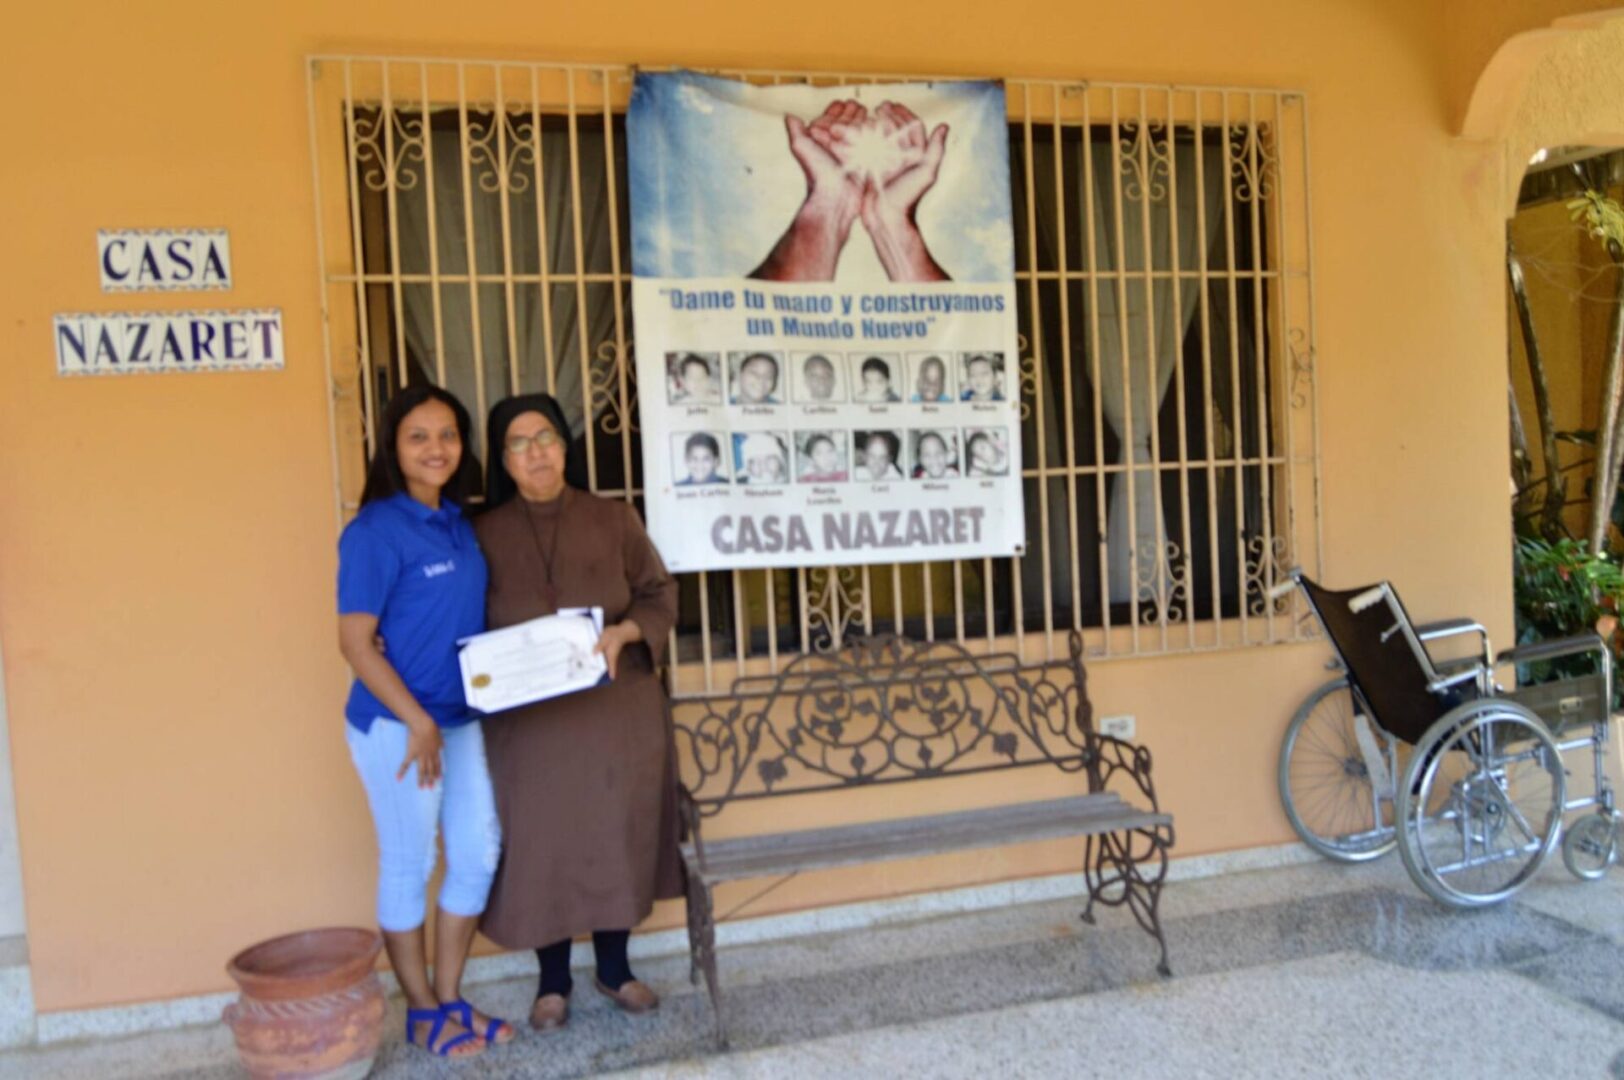 One of our female members and a nun from Casa Nazaret holding a certificate near a Casa Nazaret tarpaulin